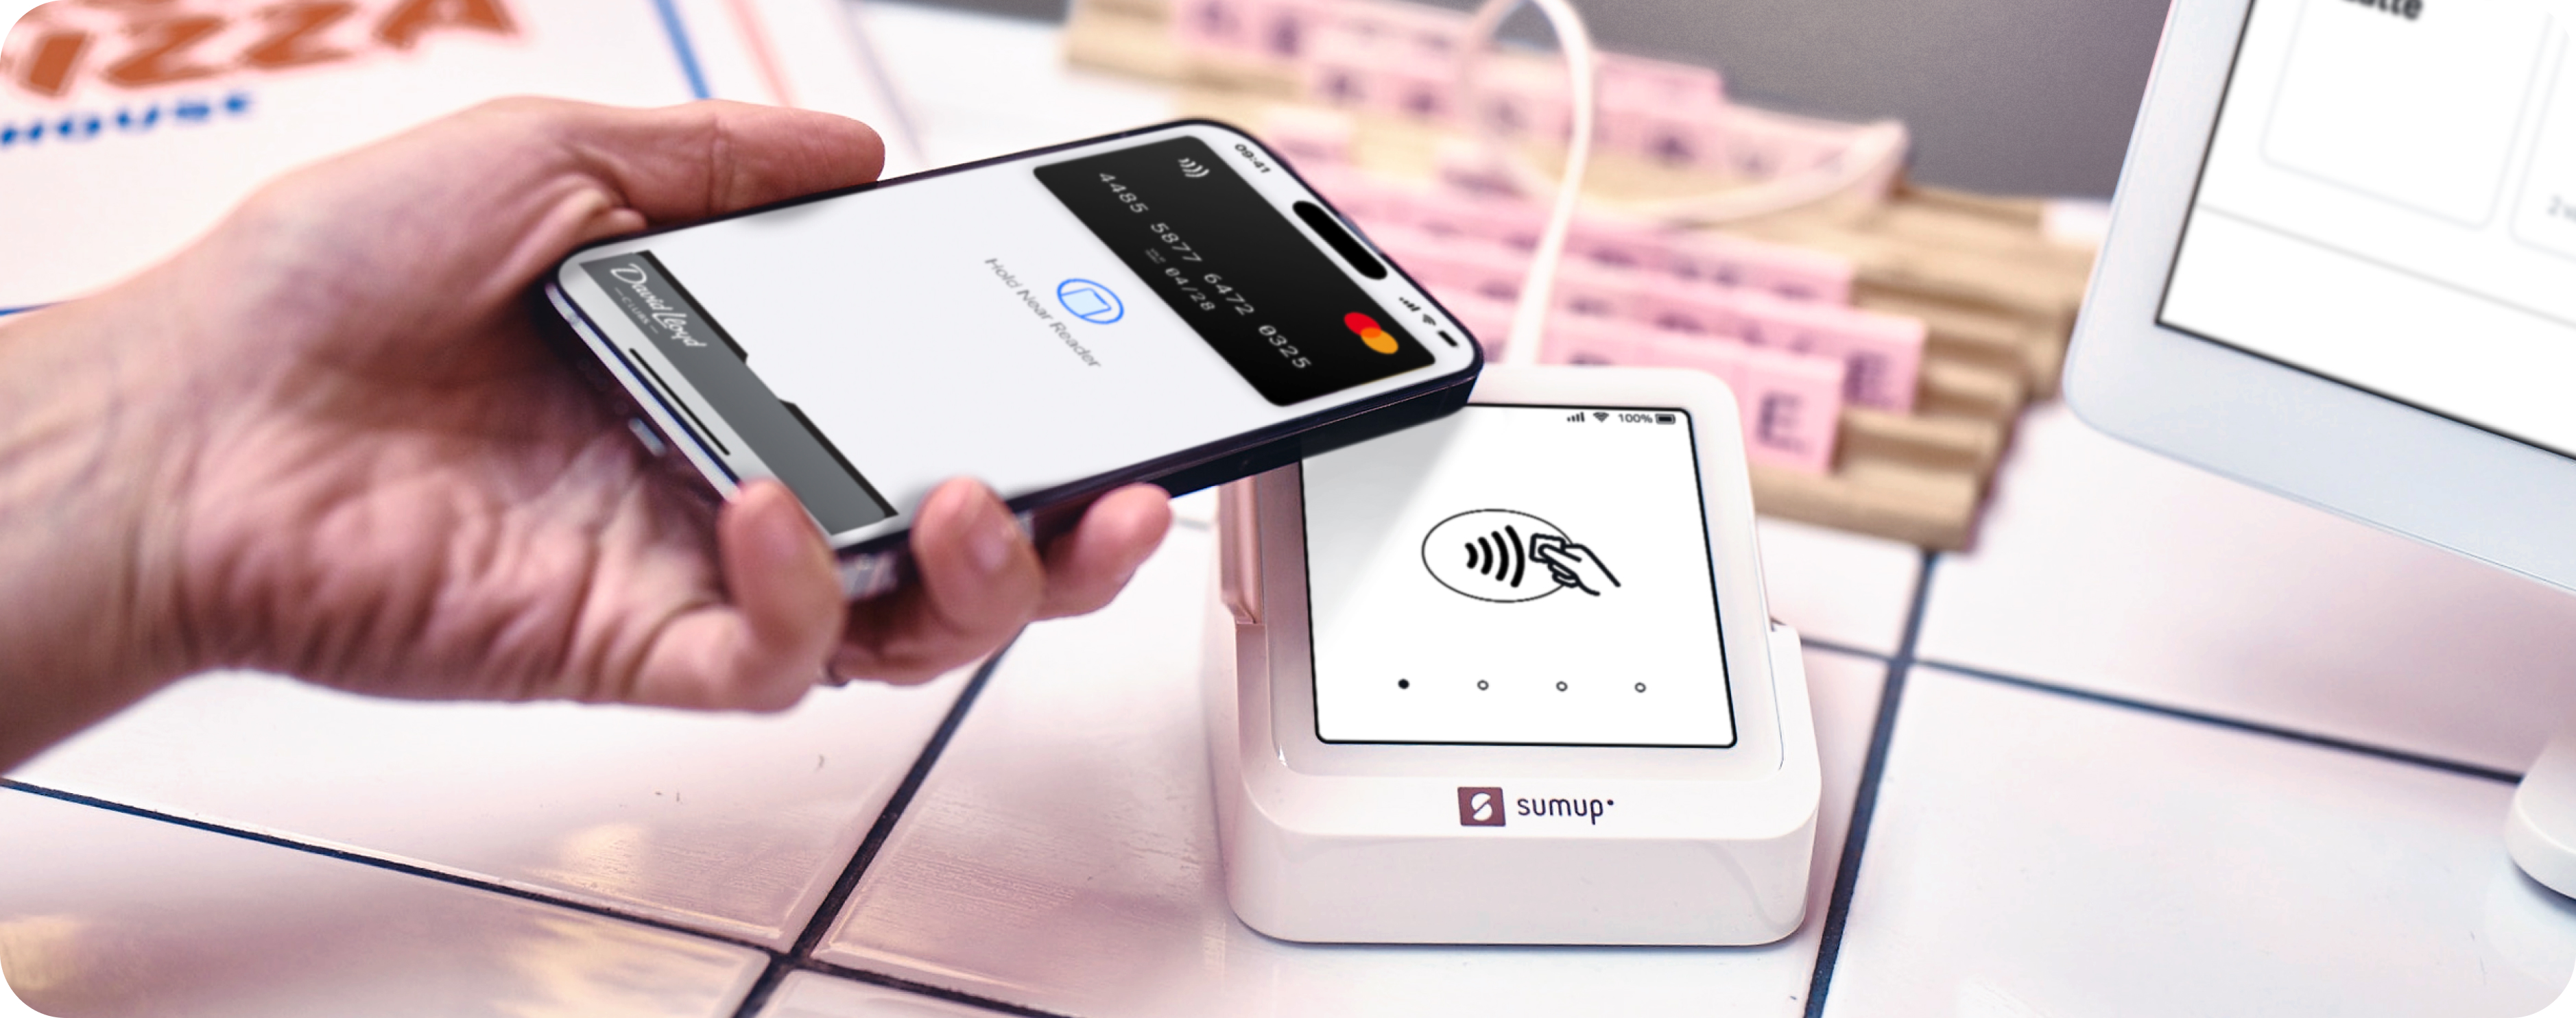 SumUp 3G Unlimited Data Mobile Card Terminal for India